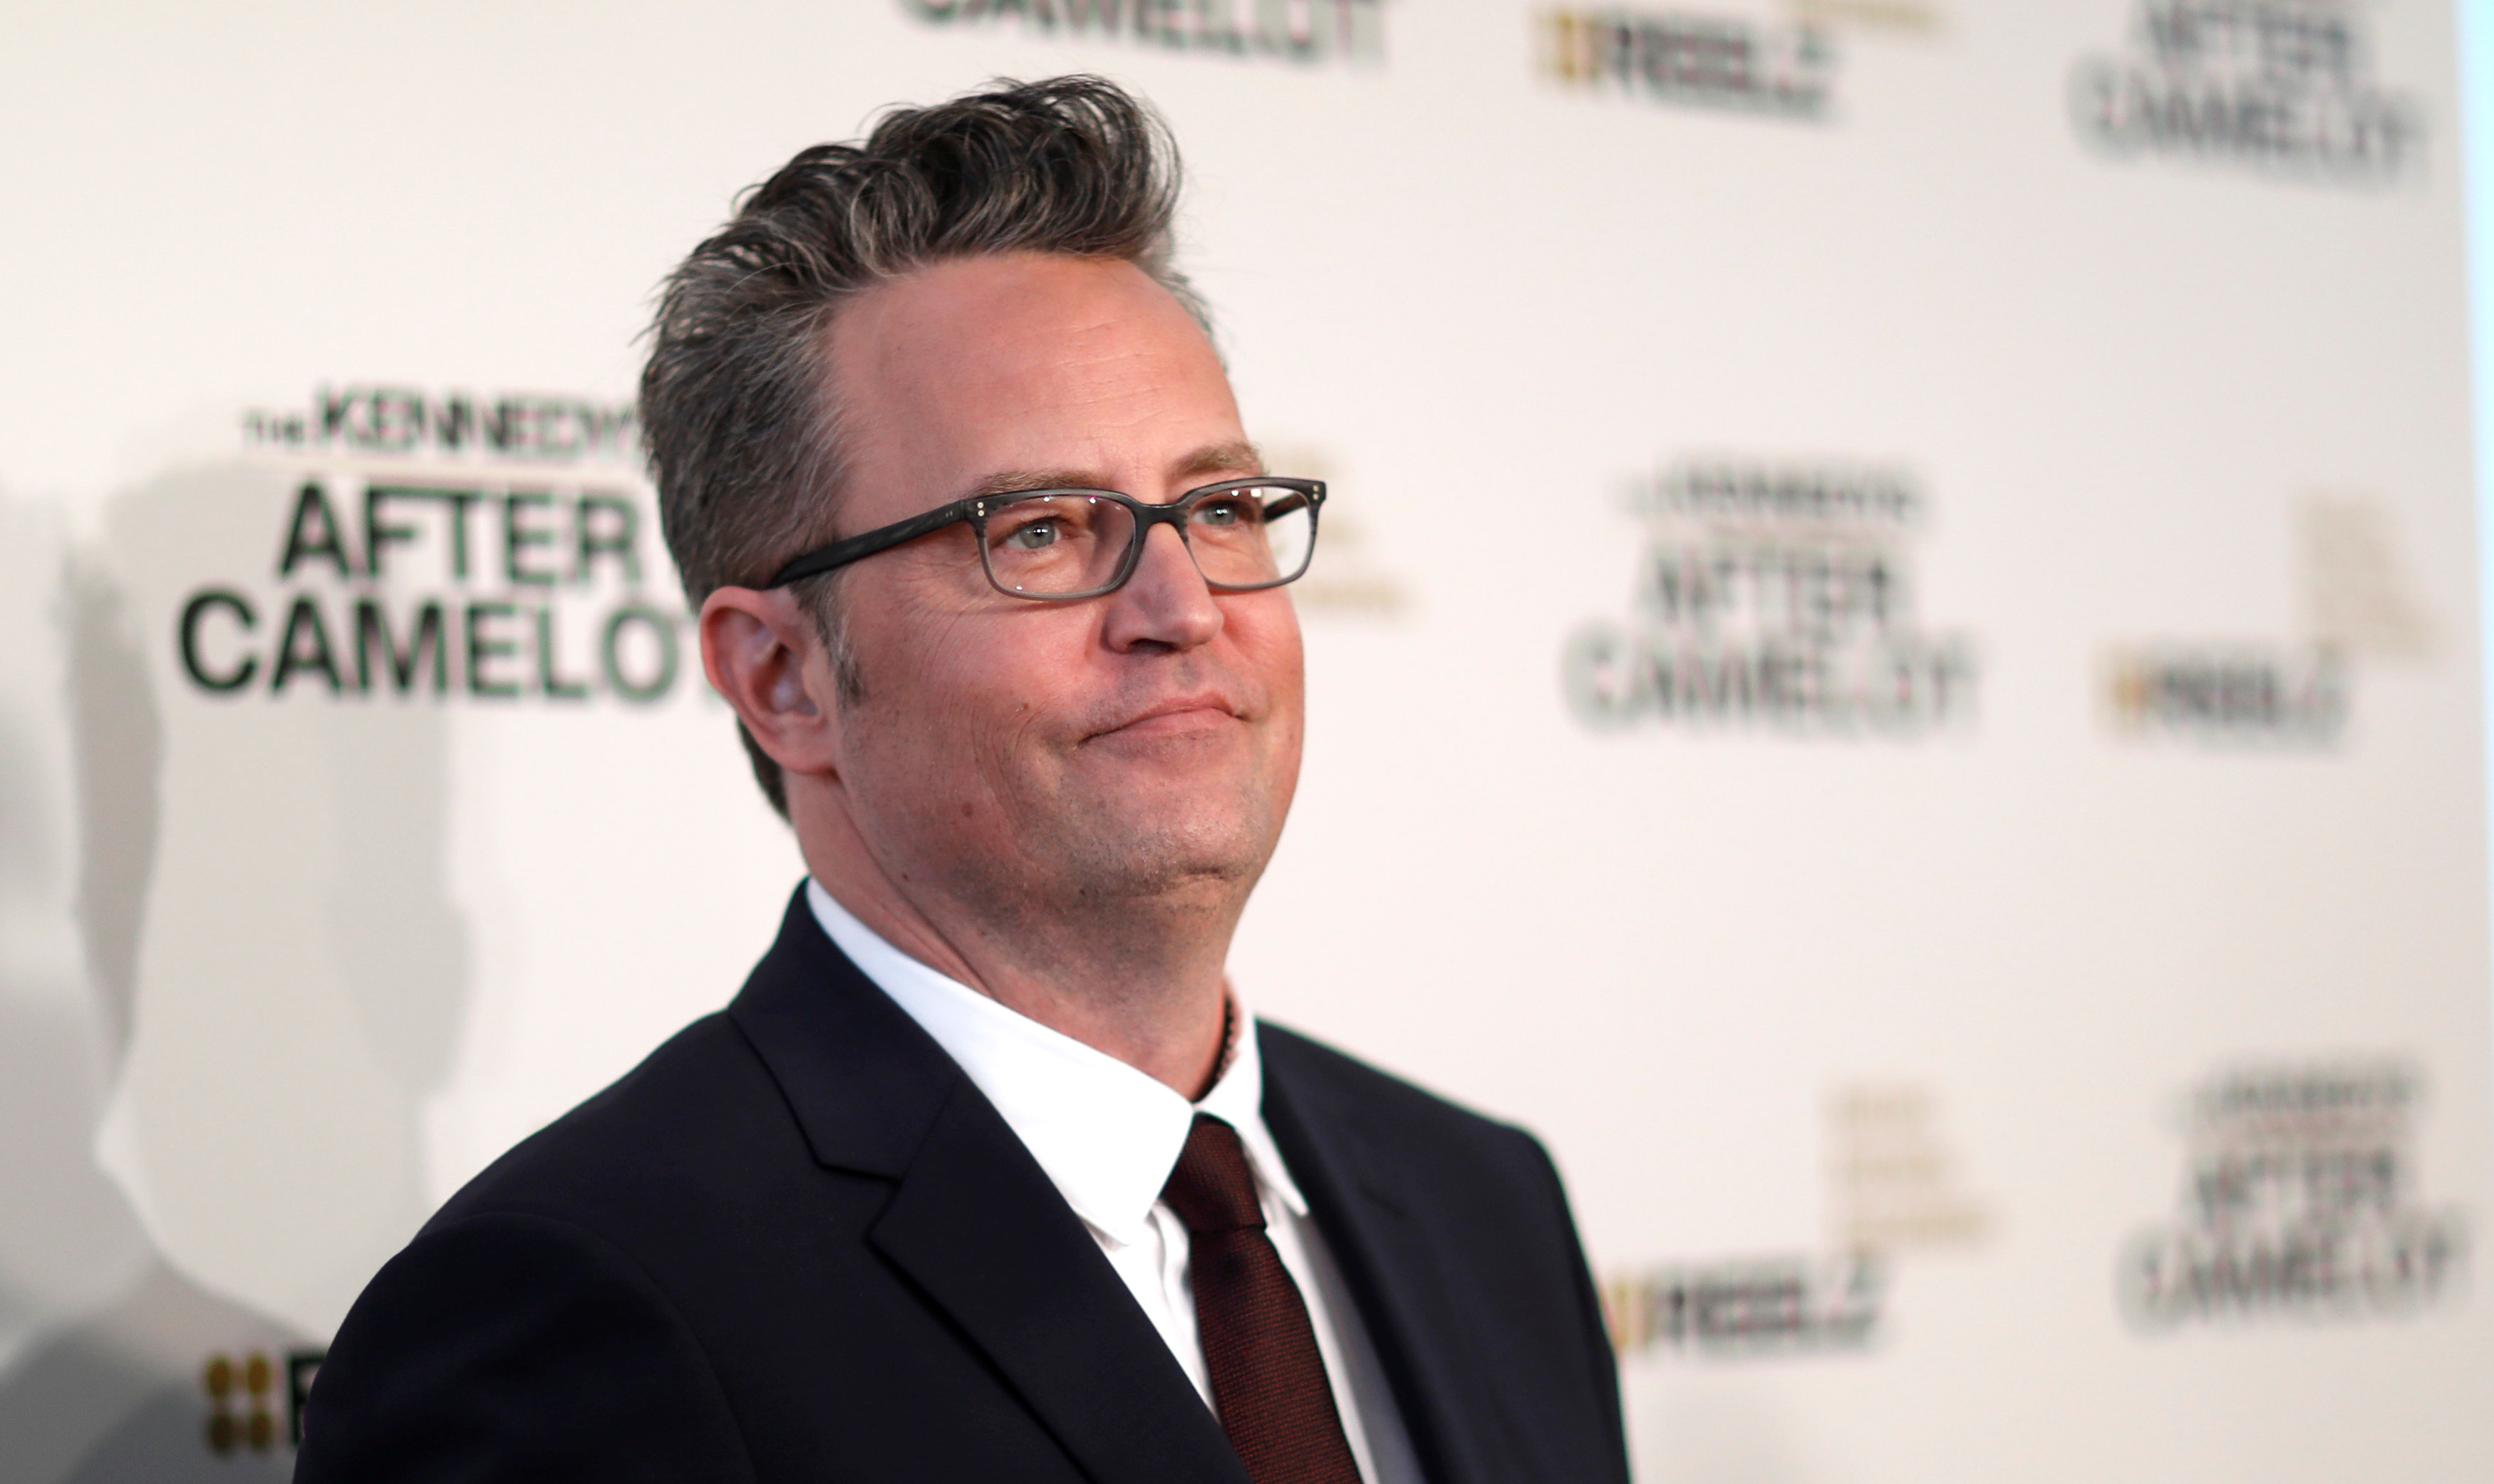 Matthew Perry’s Home Where He Drowned: Prescription Drugs Found, No Illicit Substances